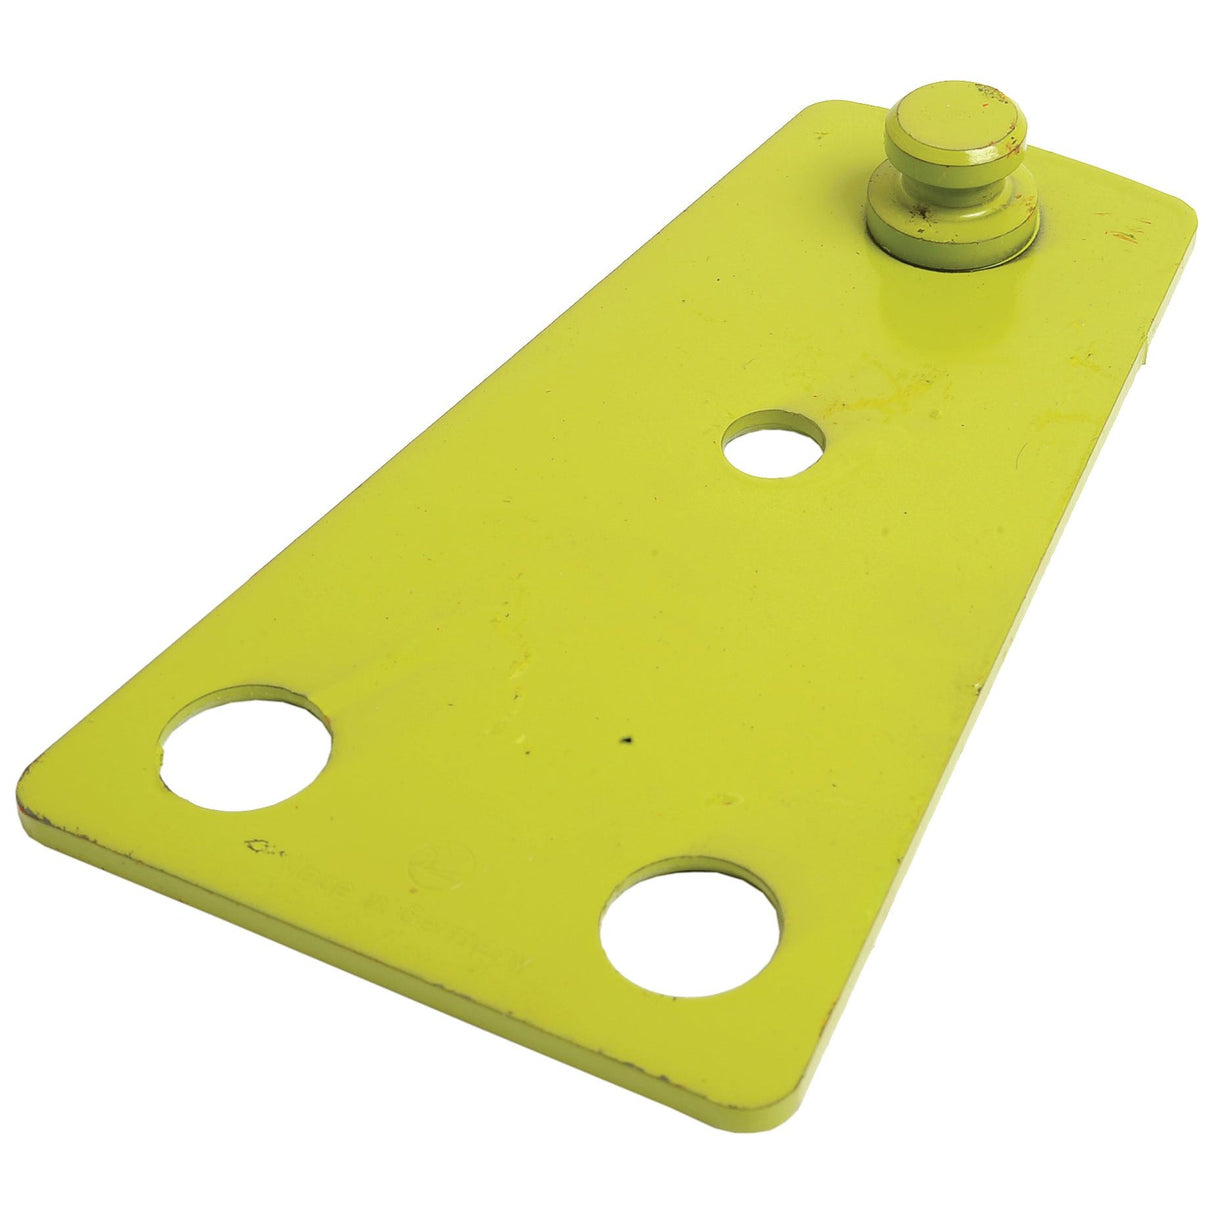 Mower blade holder - Length :160mm, Width: 92mm,  Hole centres: 55mm - Replacement for Claas
 - S.105830 - Farming Parts